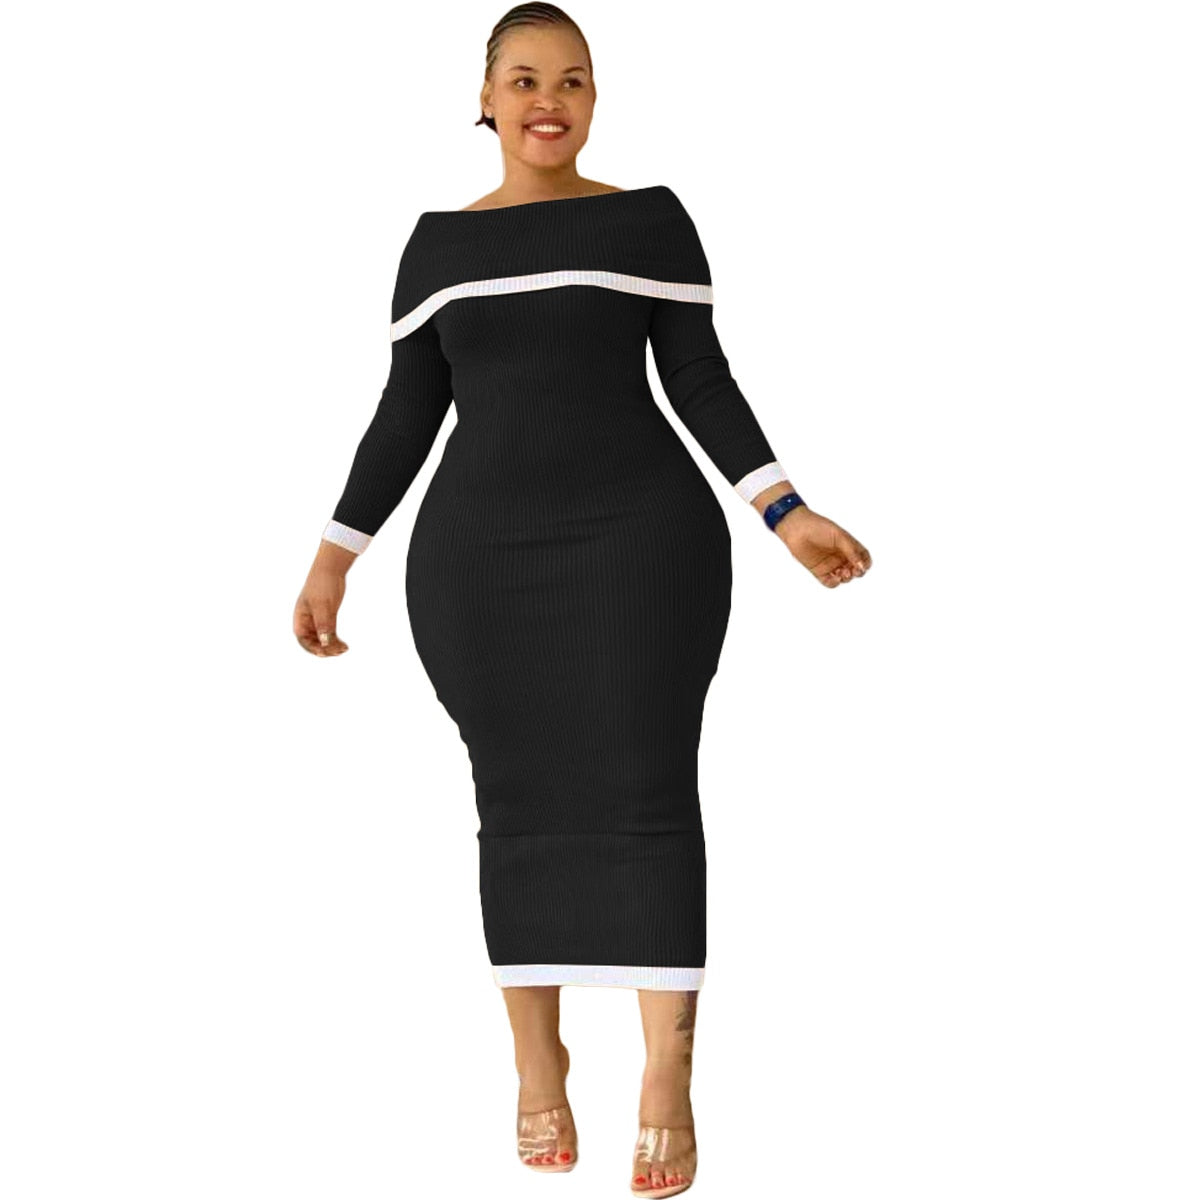 Aovica Fall Clothes For Women Plus Size Dresses  Rib Off-The-Shoulder Stitching Long Sleeves Dress